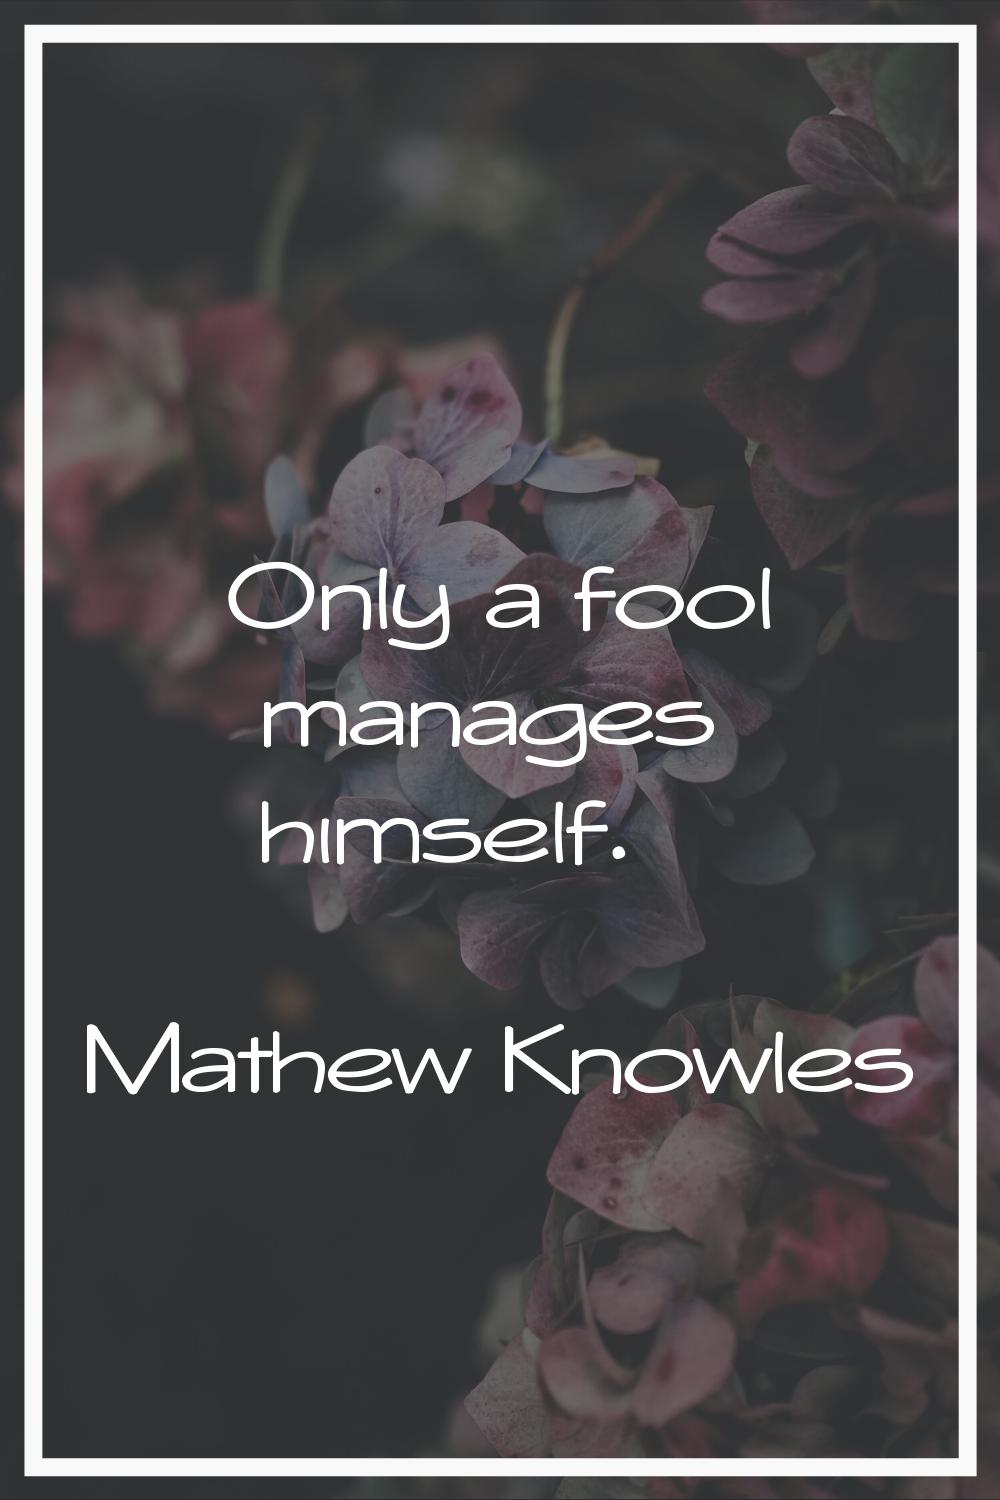 Only a fool manages himself.